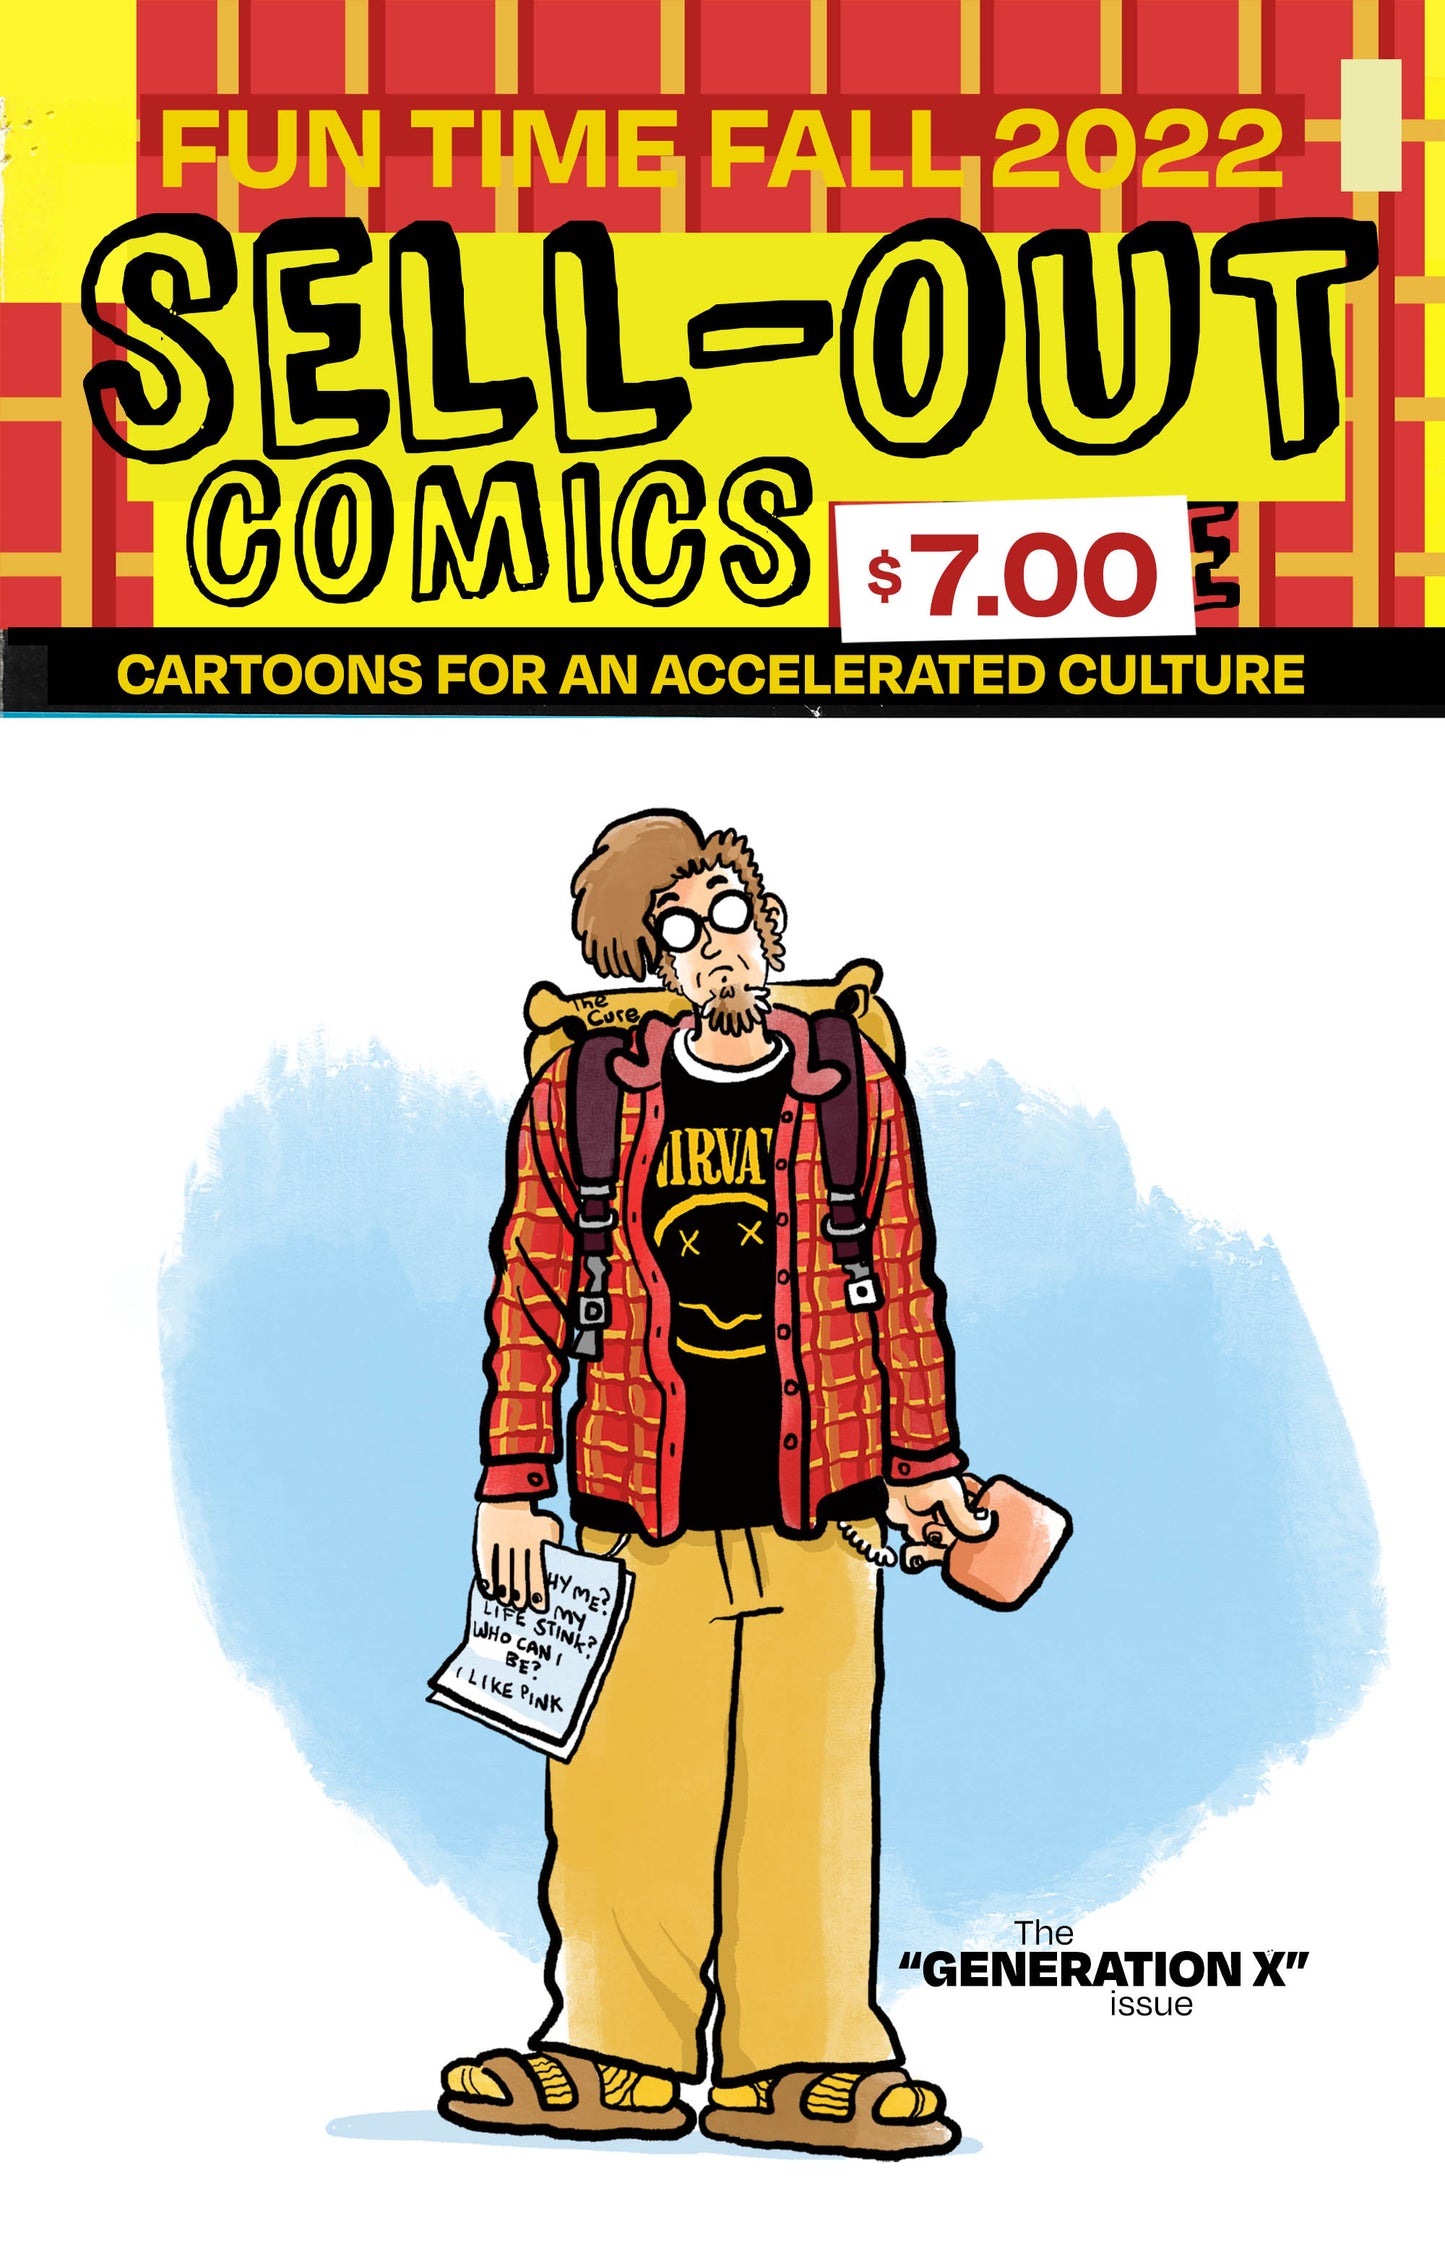 FUN TIME FALL 2022 - SELL-OUT COMICS